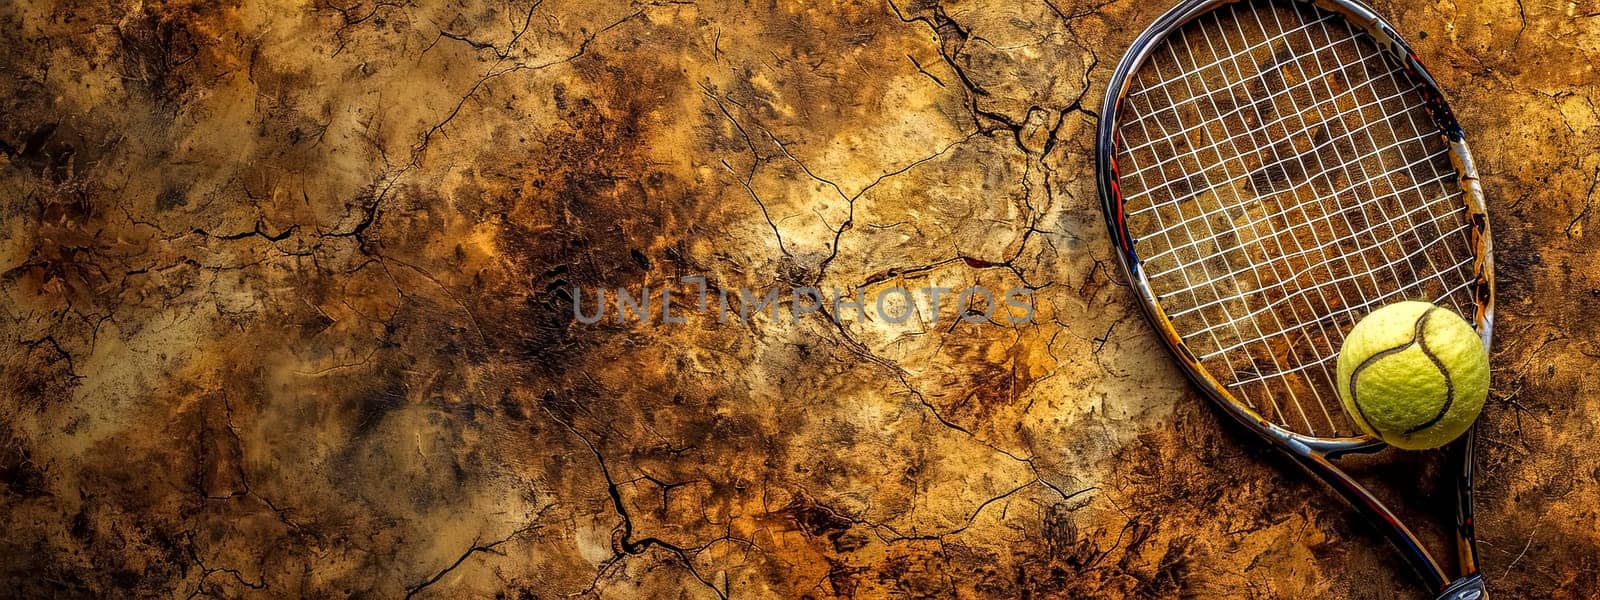 A tennis racket and ball against a cracked, rustic earth-toned background. copy space